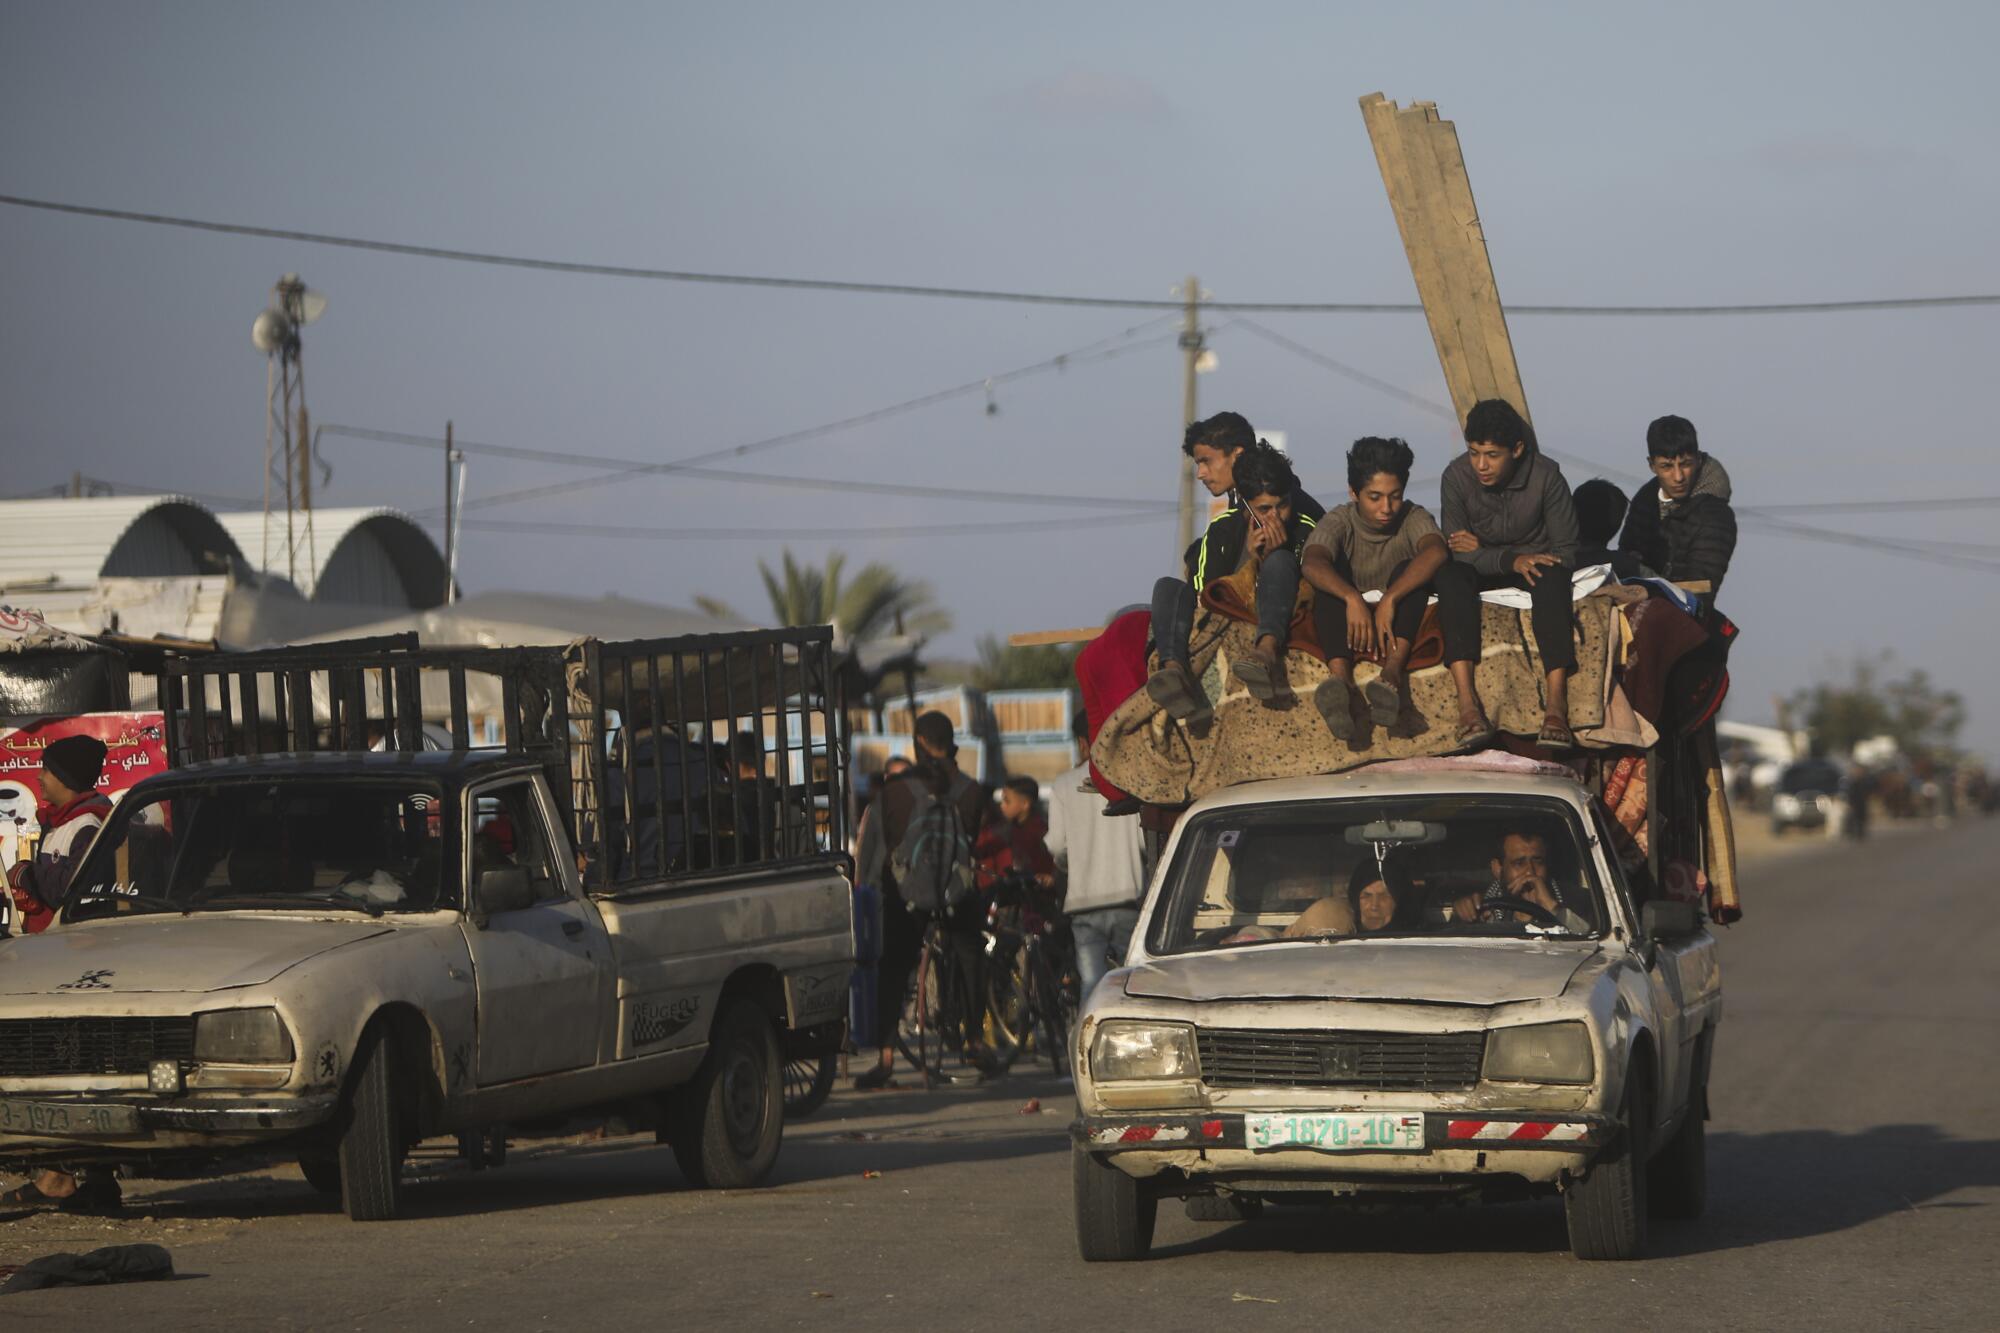 Gazans crowded into vehicles fleeing the Israeli ground offensive